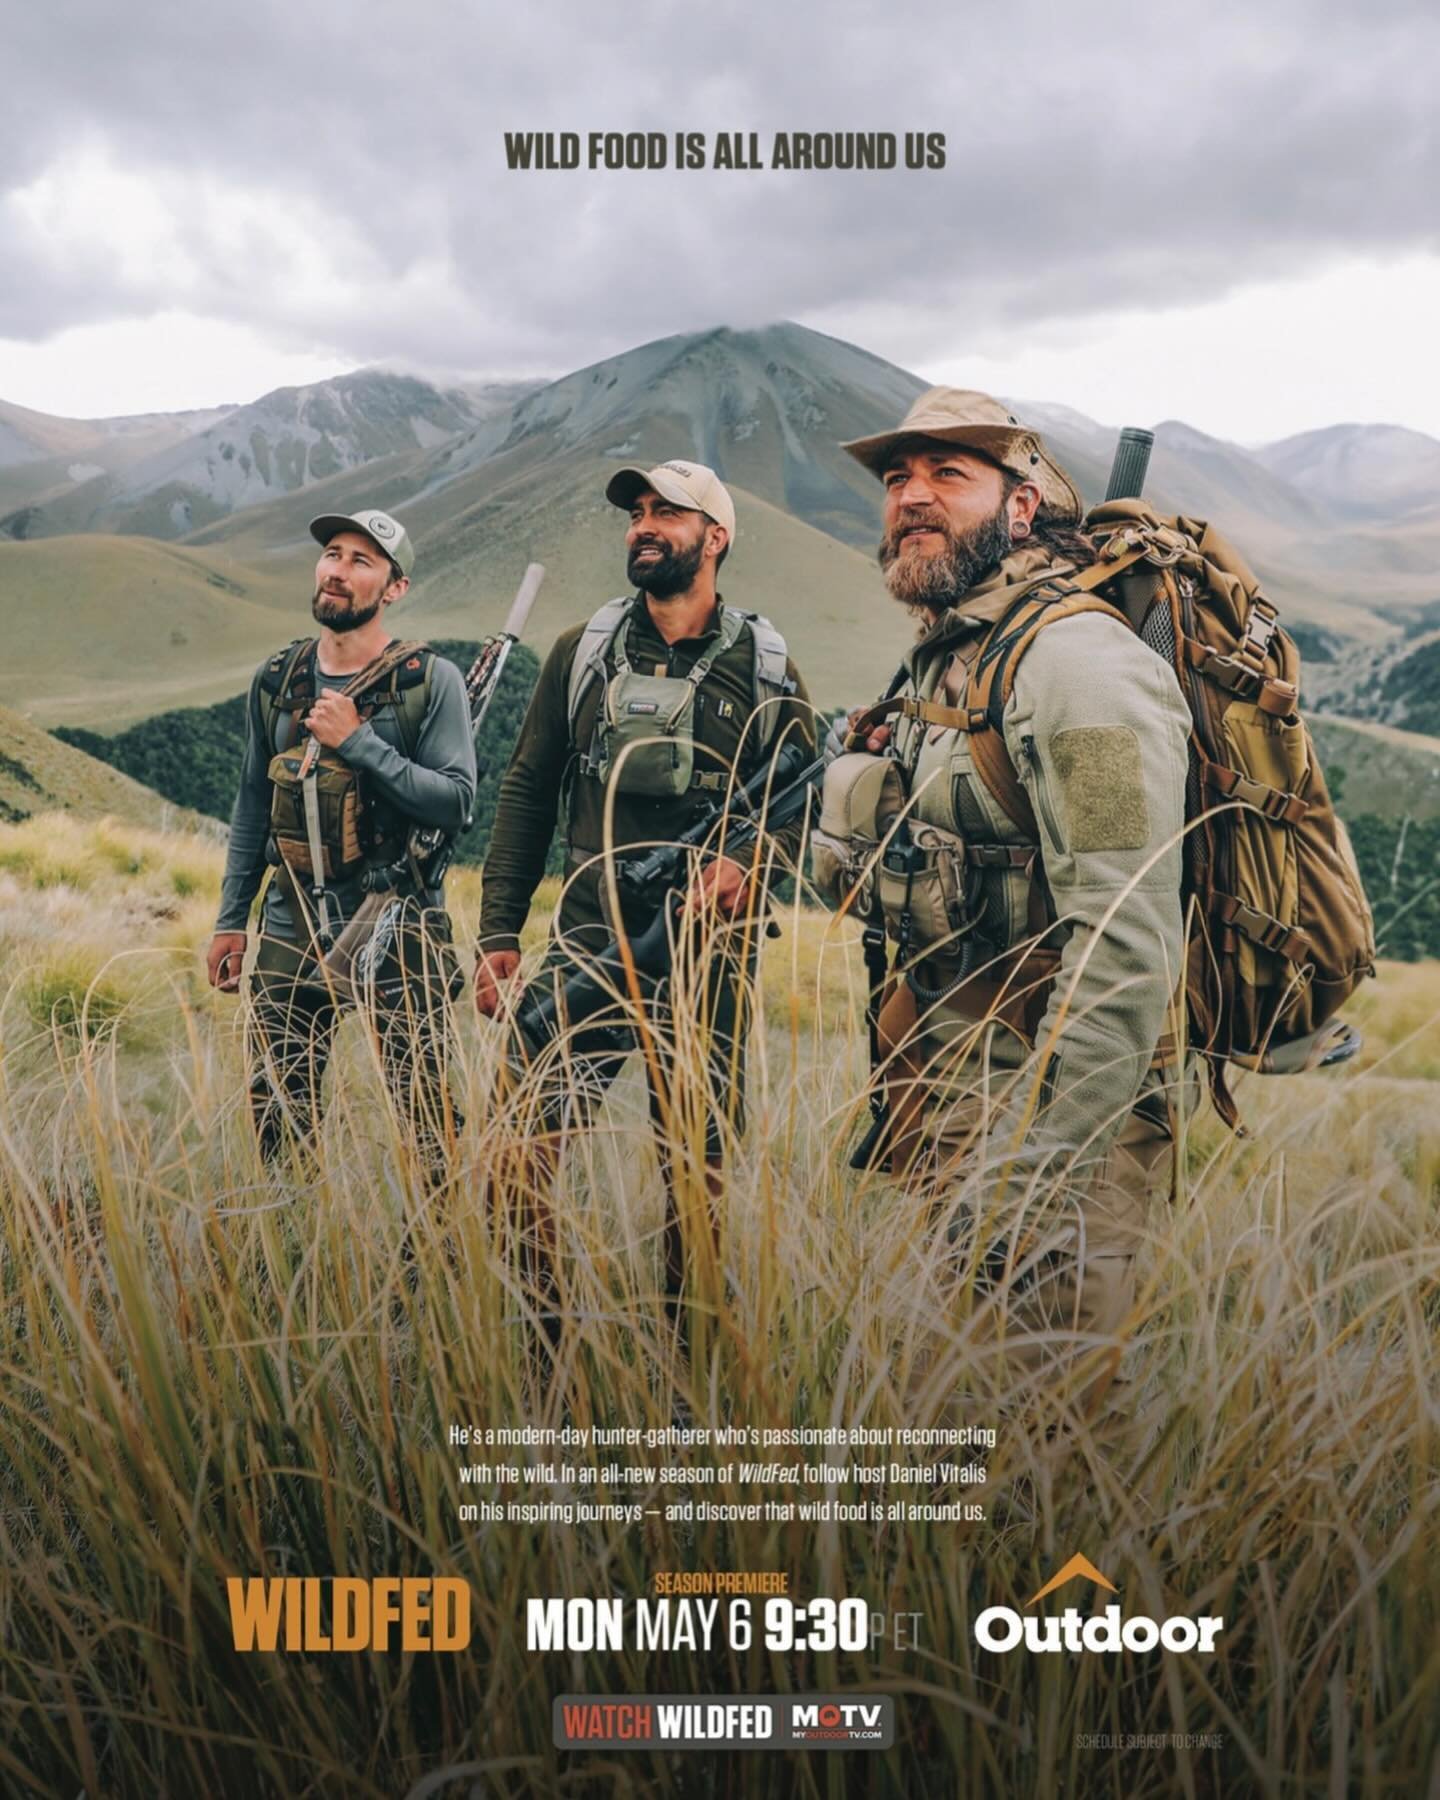 Wild Food Is All Around You!

From the very beginning that&rsquo;s been the @Wild.Fed message, so I&rsquo;m loving it emblazoned atop this print ad that @outdoorchanneltv made for Season 4 of WildFed!

It&rsquo;s an image from our Himalayan Tahr hunt